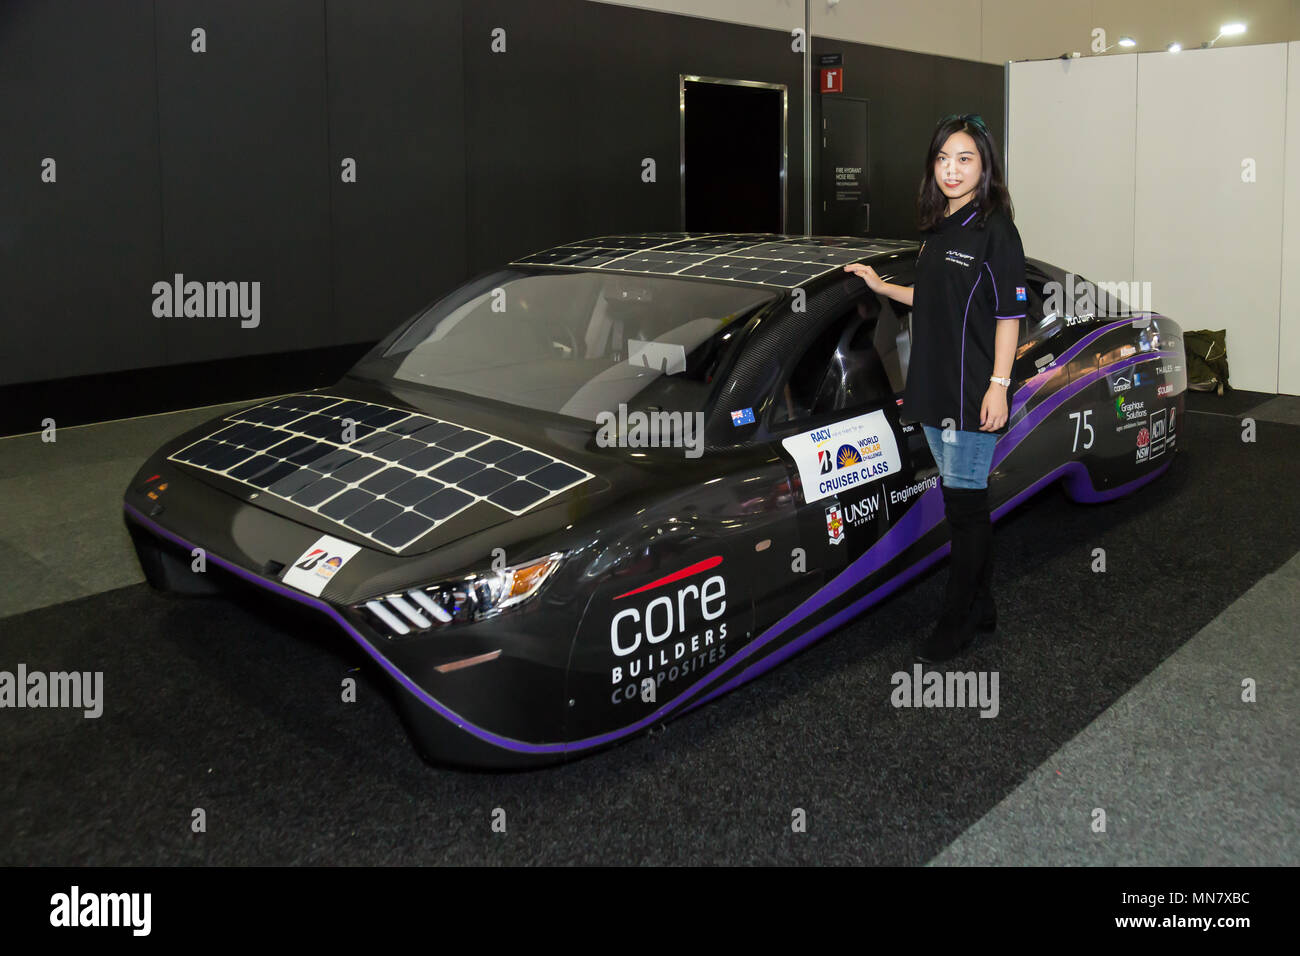 Sydney, Australia. 15th May, 2018. Sydney, Australia. 15th May, 2018. CeBIT Australia brings together the coolest technology and the world’s most innovative minds, at the International Convention Centre , Darling Harbour, Sydney, Australia. Catherine Liao shows a Solo Car, one of the students at University at New South Wales-UNSW, who was involved in the design and invention of 'Violet' part of Team Sunswift at UNSW. Credit: Paul Lovelace/Alamy Live News Credit: Paul Lovelace/Alamy Live News Stock Photo